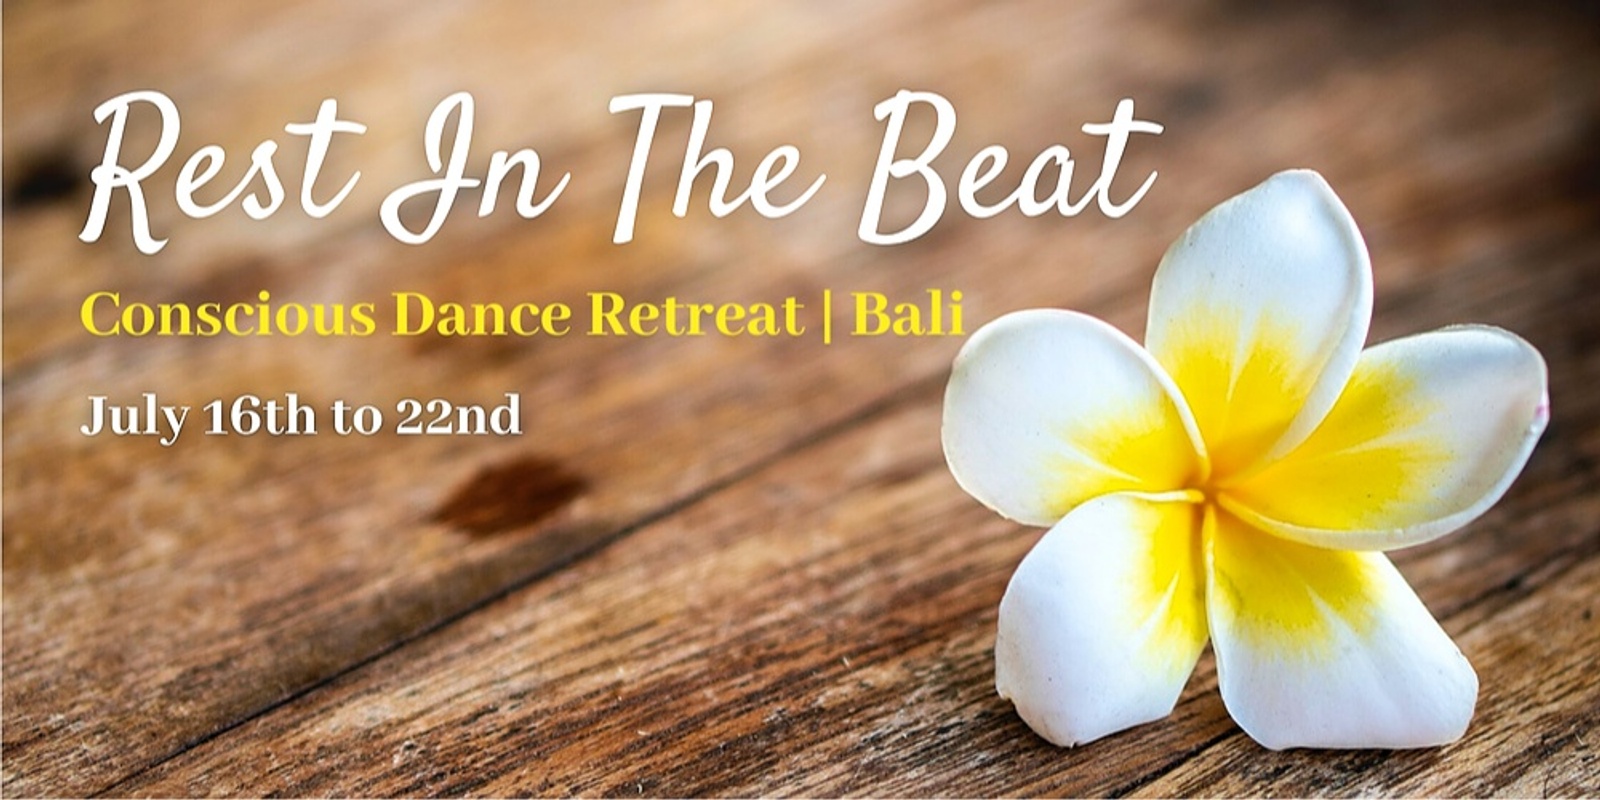 Rest In the Beat - Conscious Dance retreat in Bali